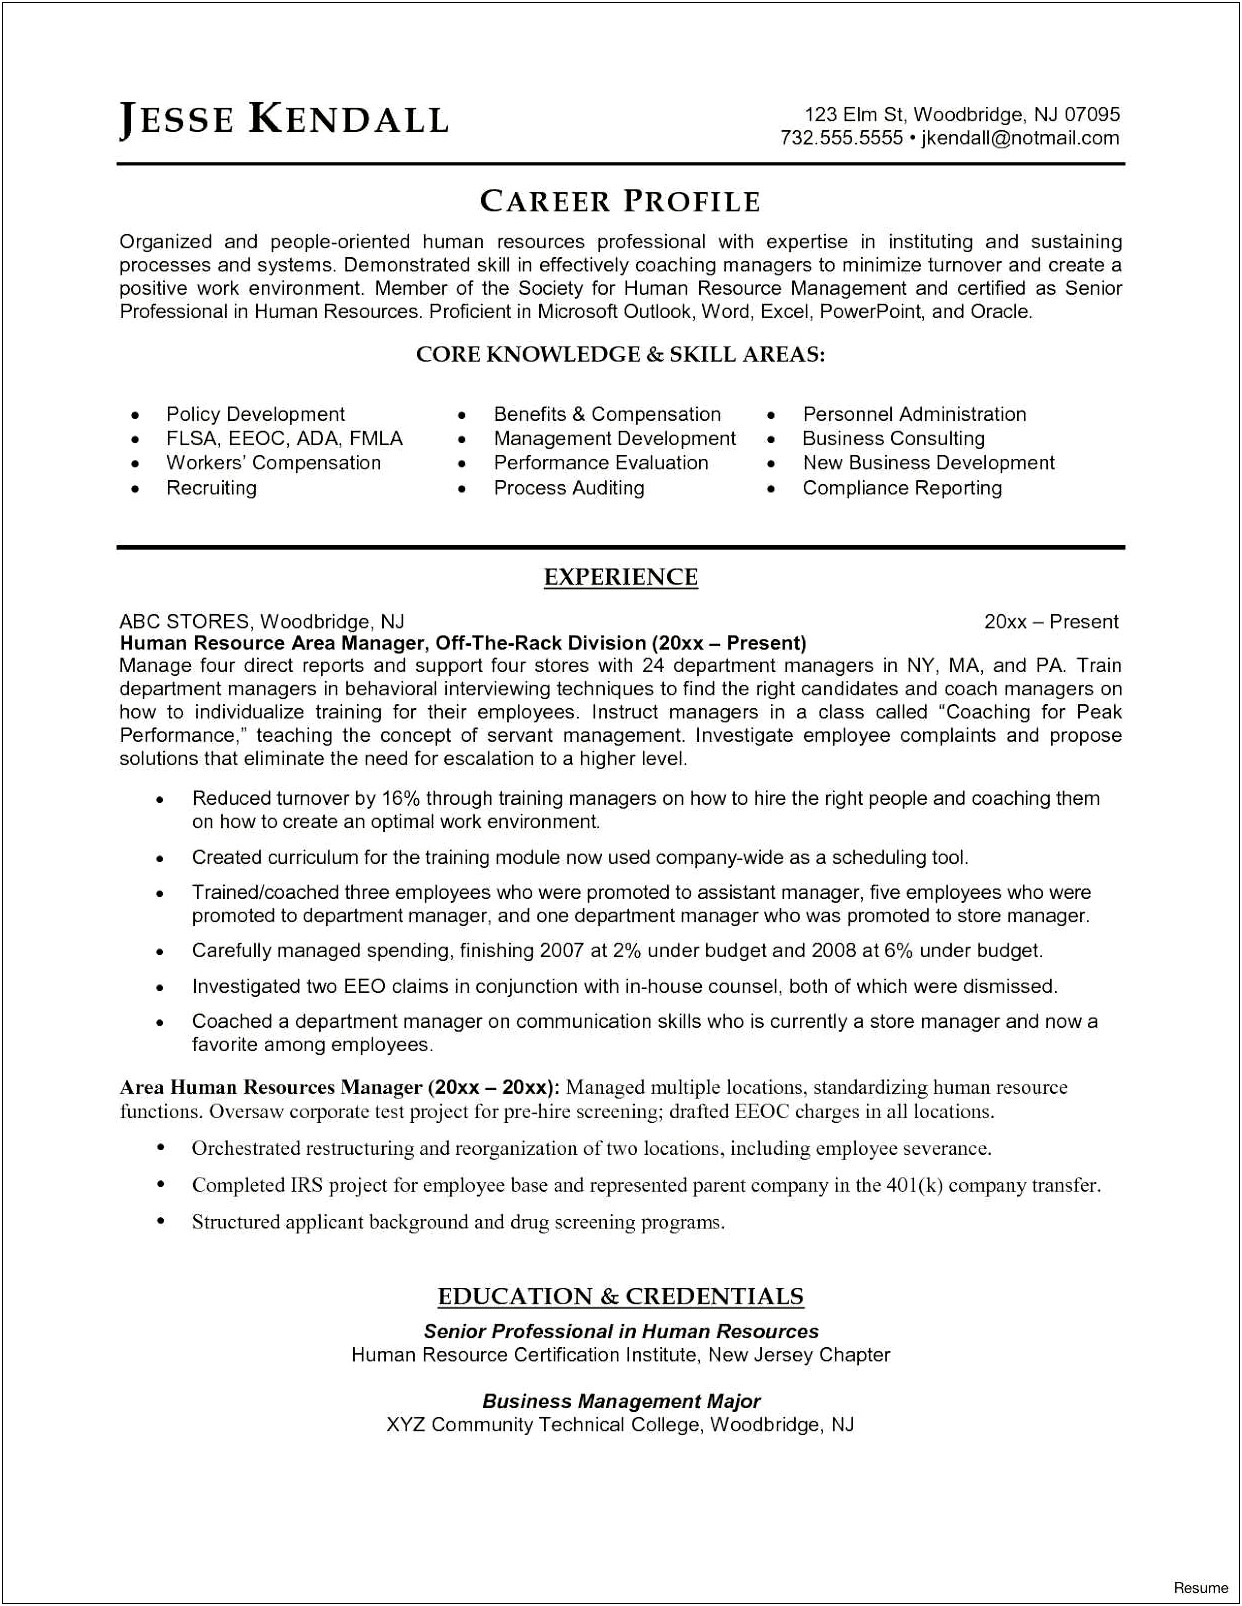 Resume Examples For Human Services